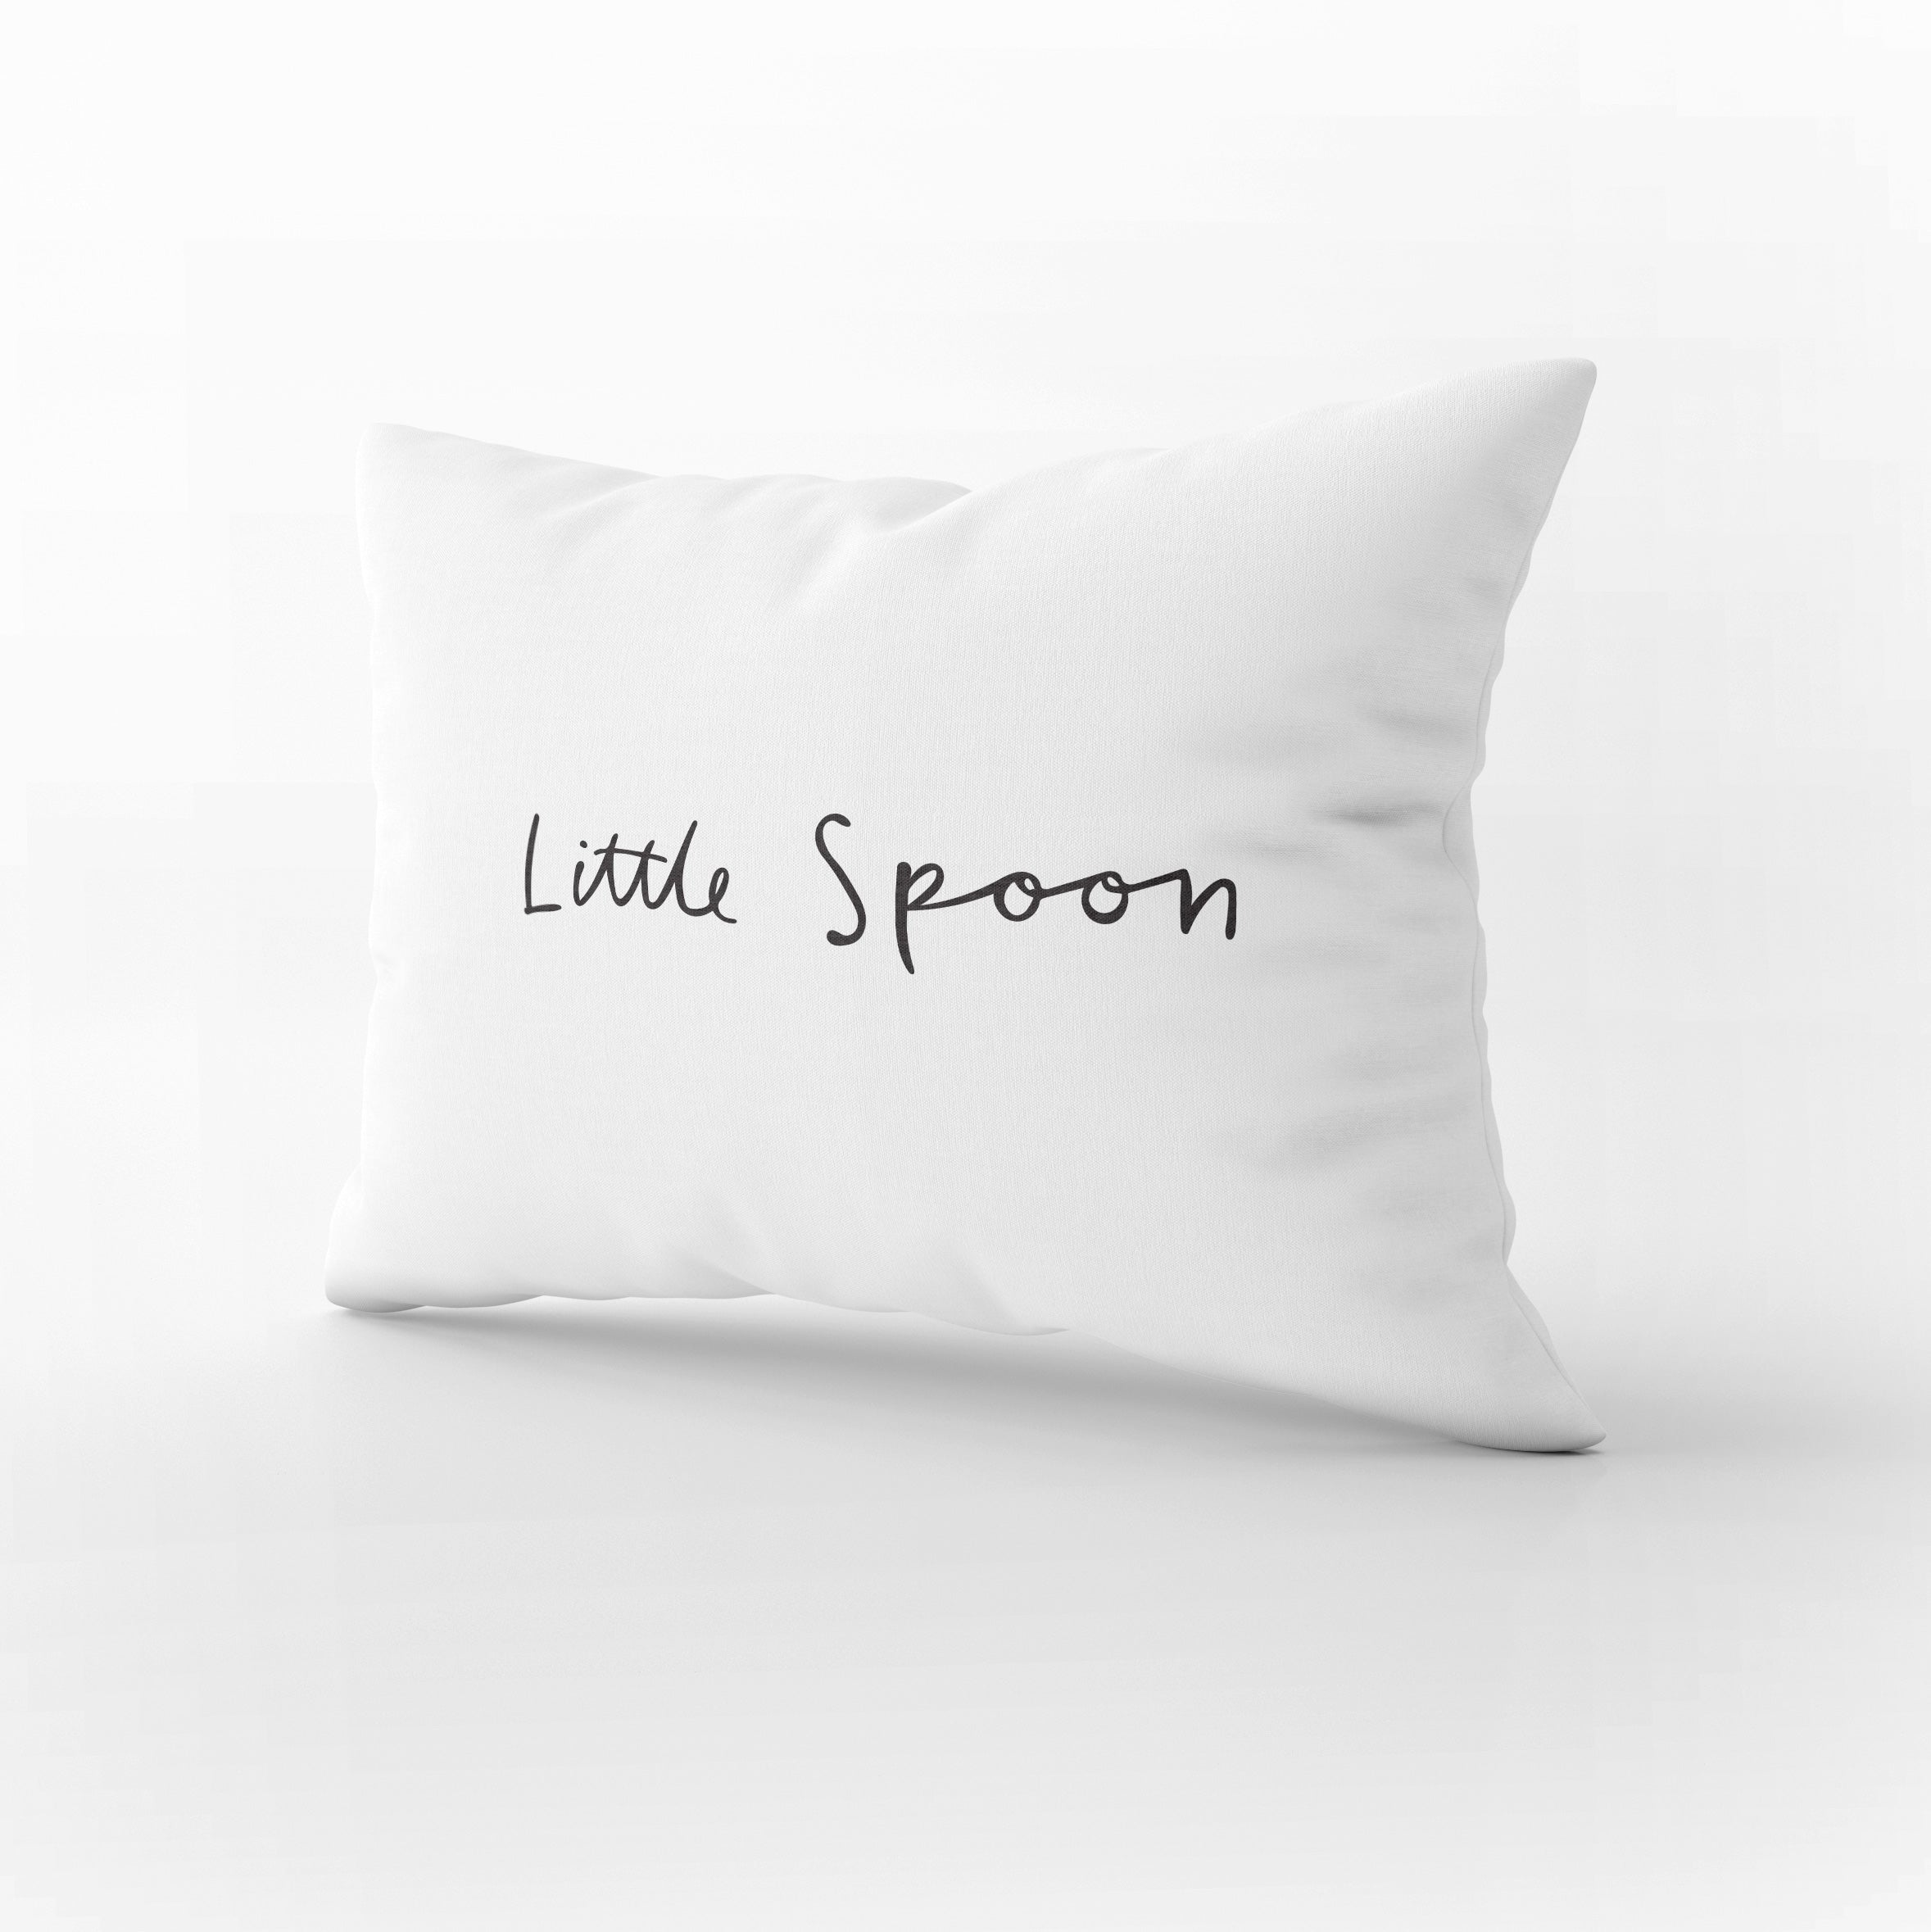 PS03- BIG SPOON & LITTLE SPOON PILLOW CASES - Shawshank Clothing 